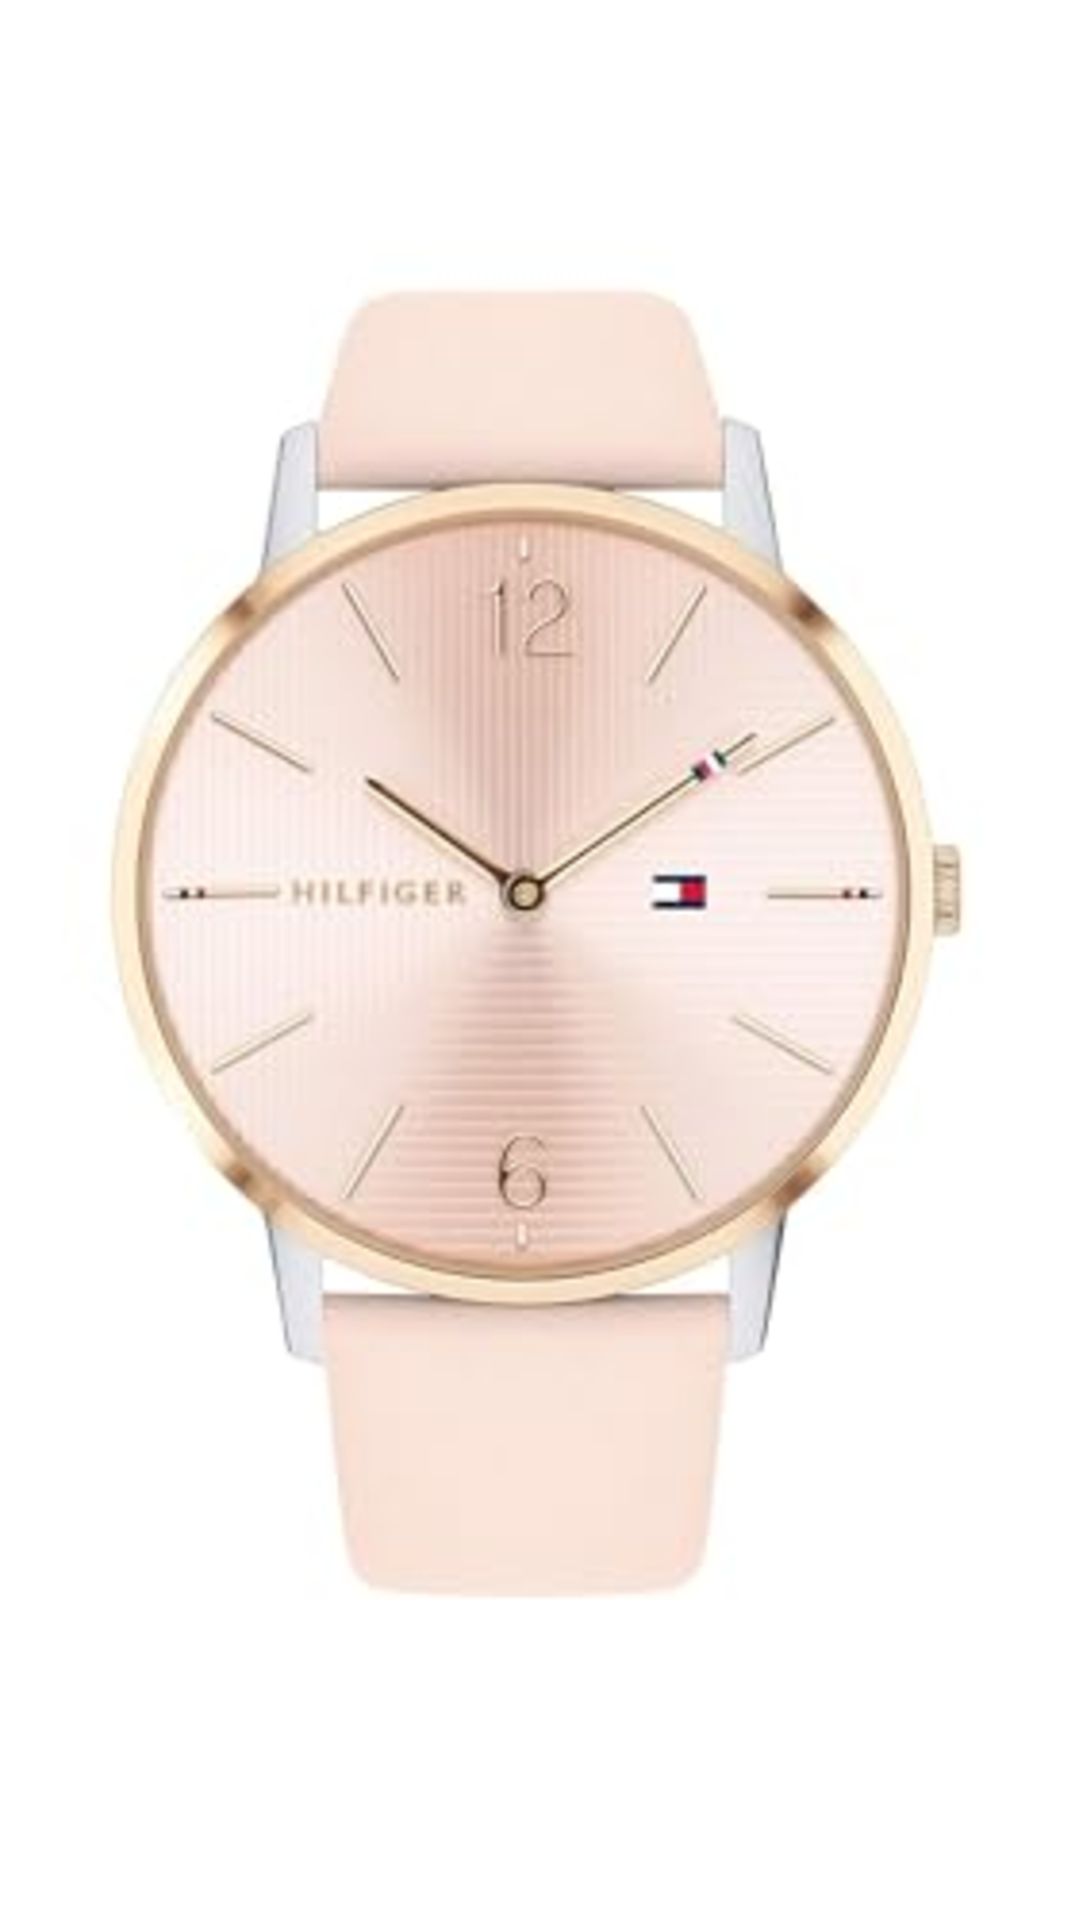 RRP £119.00 Tommy Hilfiger Unisex Adult Analog Quartz Watch with Leather Strap 1781973